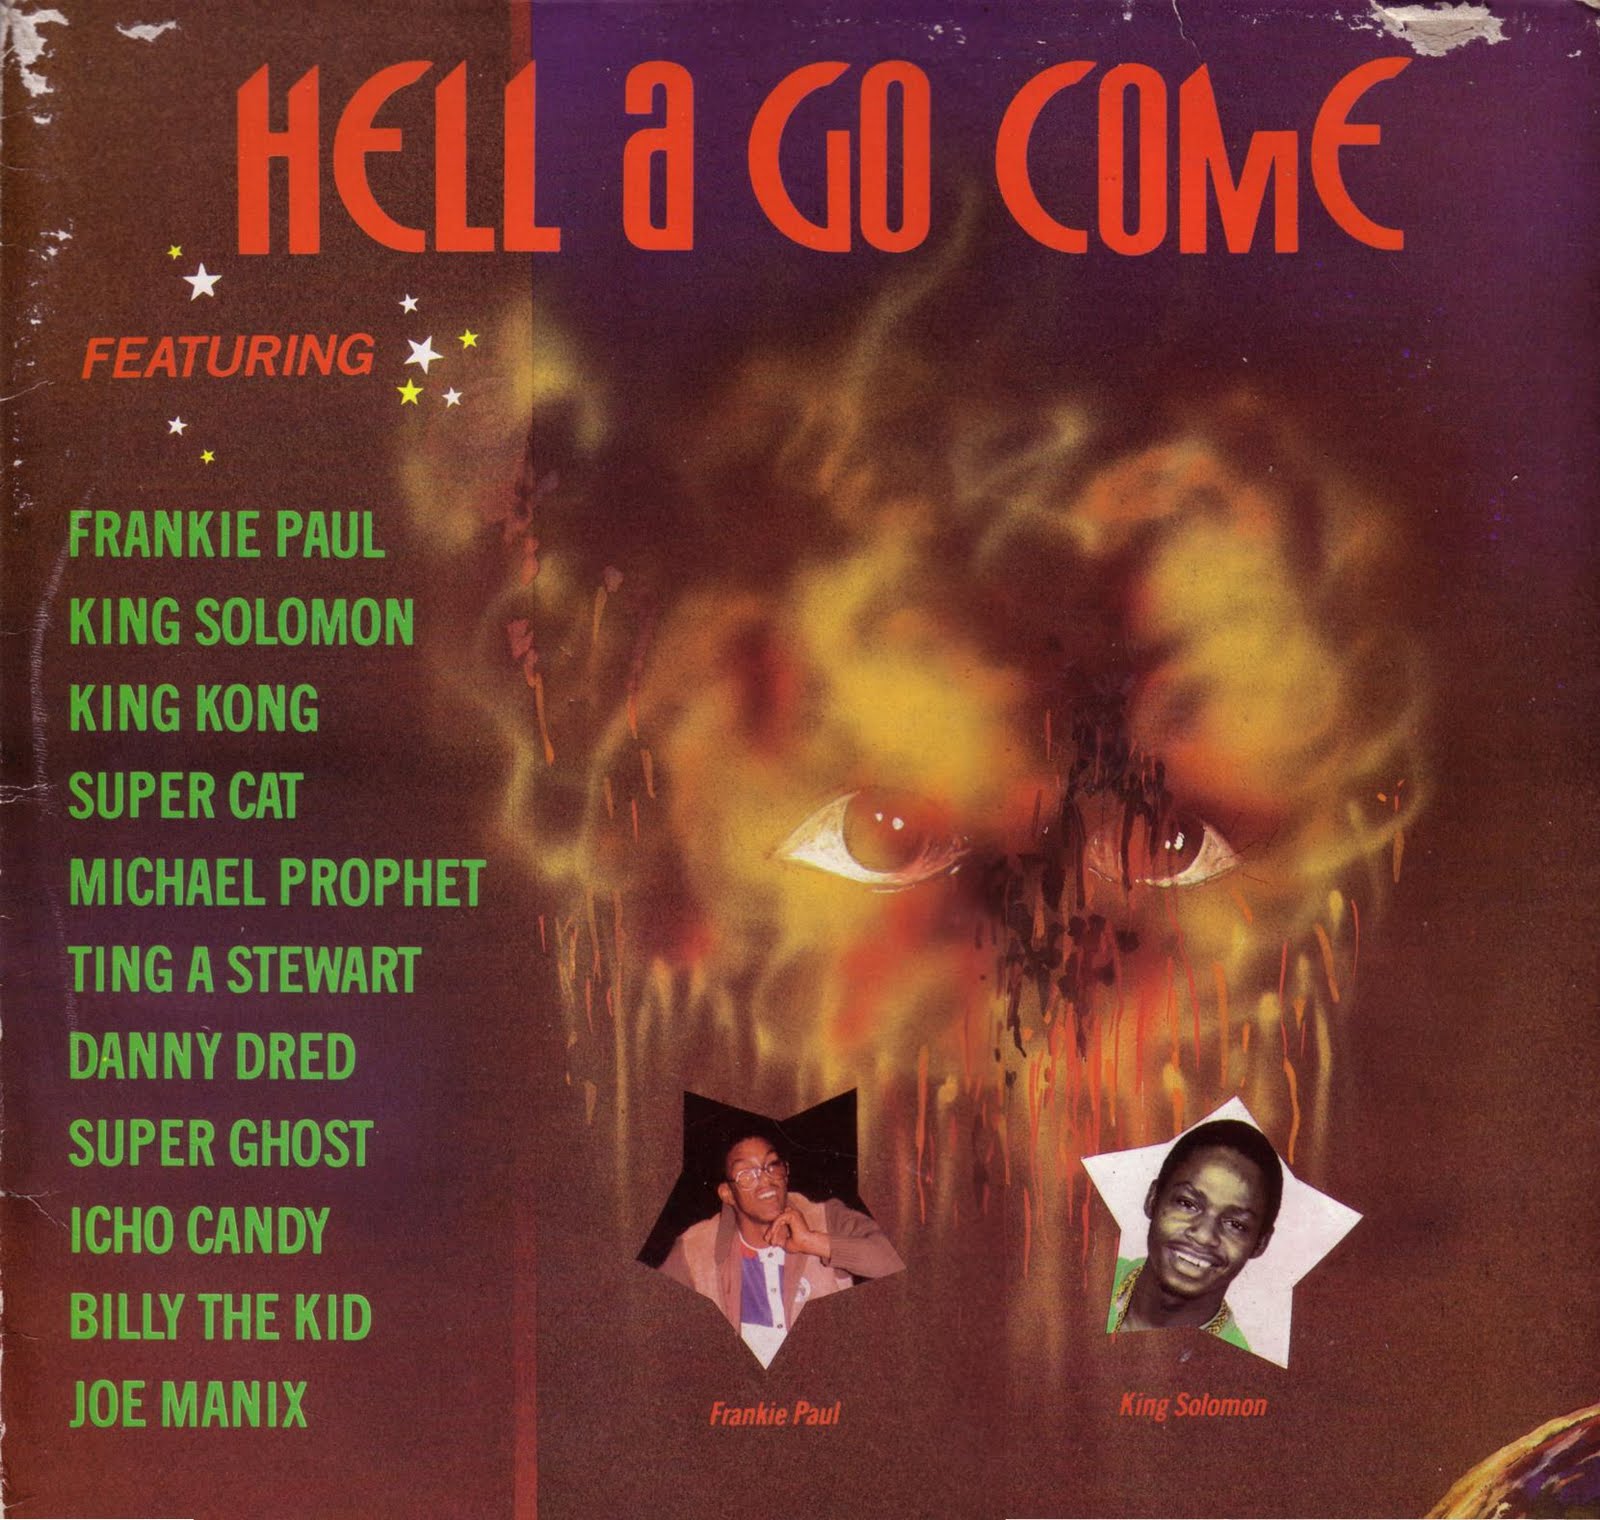 hell a go come(ottey's promotion)1987